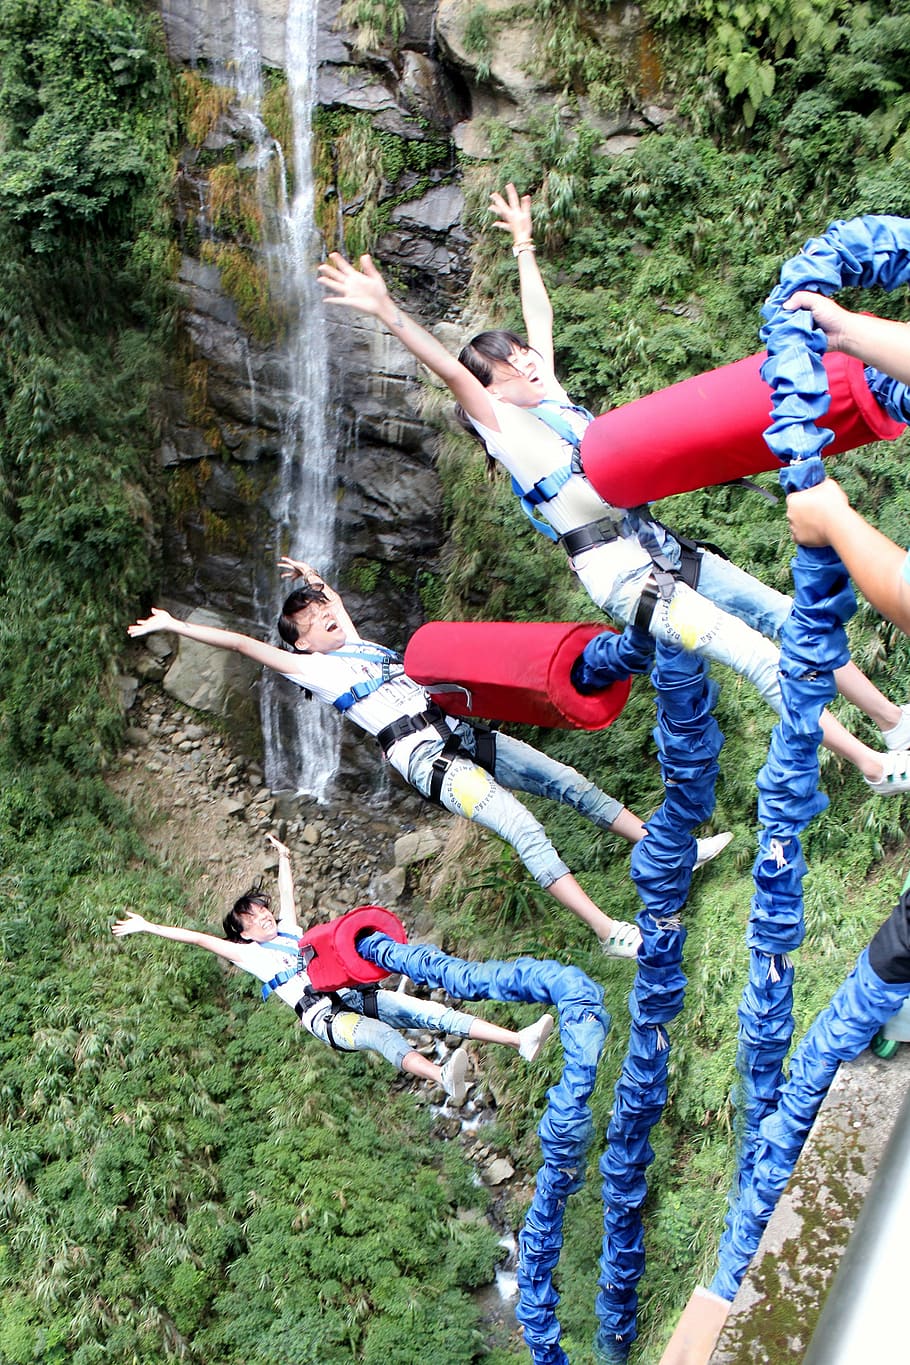 bungee jumping, jump, extremely unusual conditions, bungee, outdoors, nature, people, child, leisure activity, real people